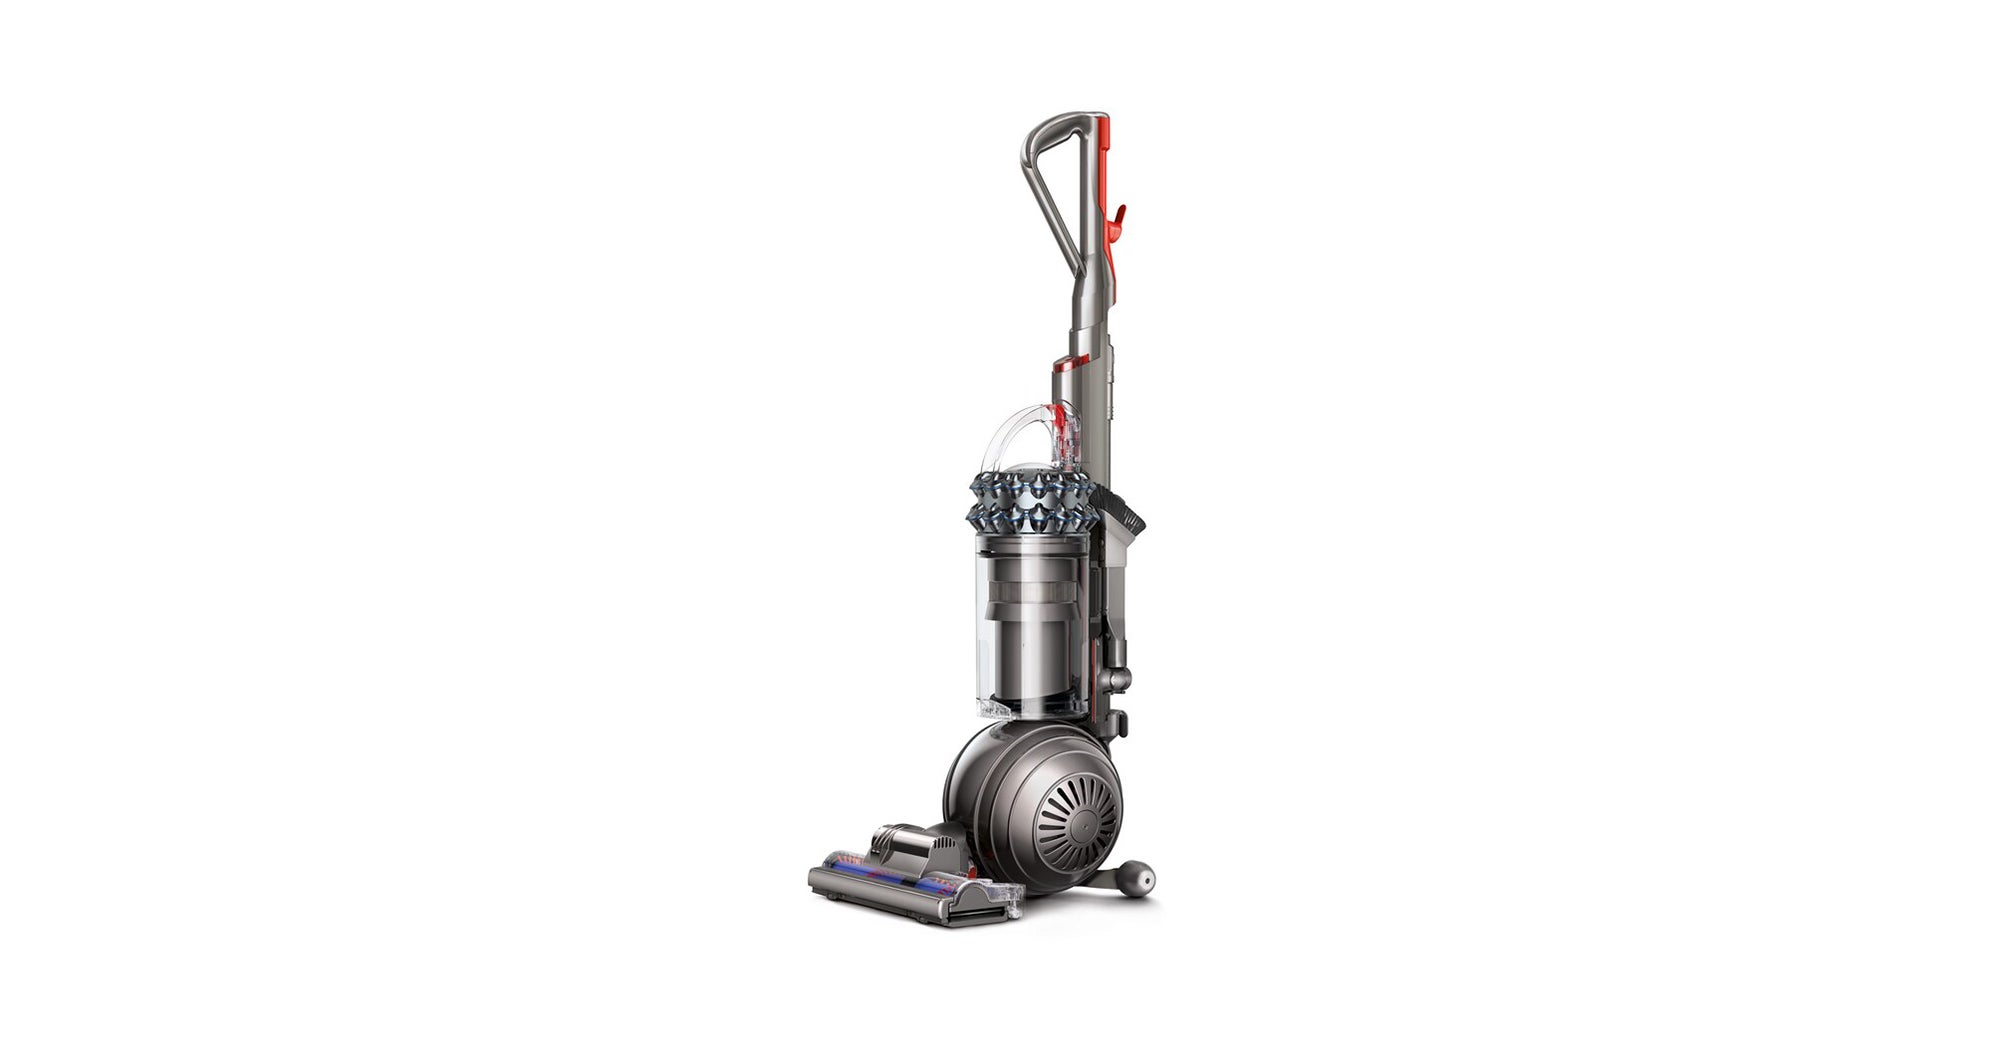 Dyson absolute 2. Dyson Cinetic big Ball absolute 2. Dyson Cinetic big Ball absolute 2 сборка. Dyson hu02. Пылесос Dyson Cinetic big Ball absolute 2 (cy26), Nickel/Silver.